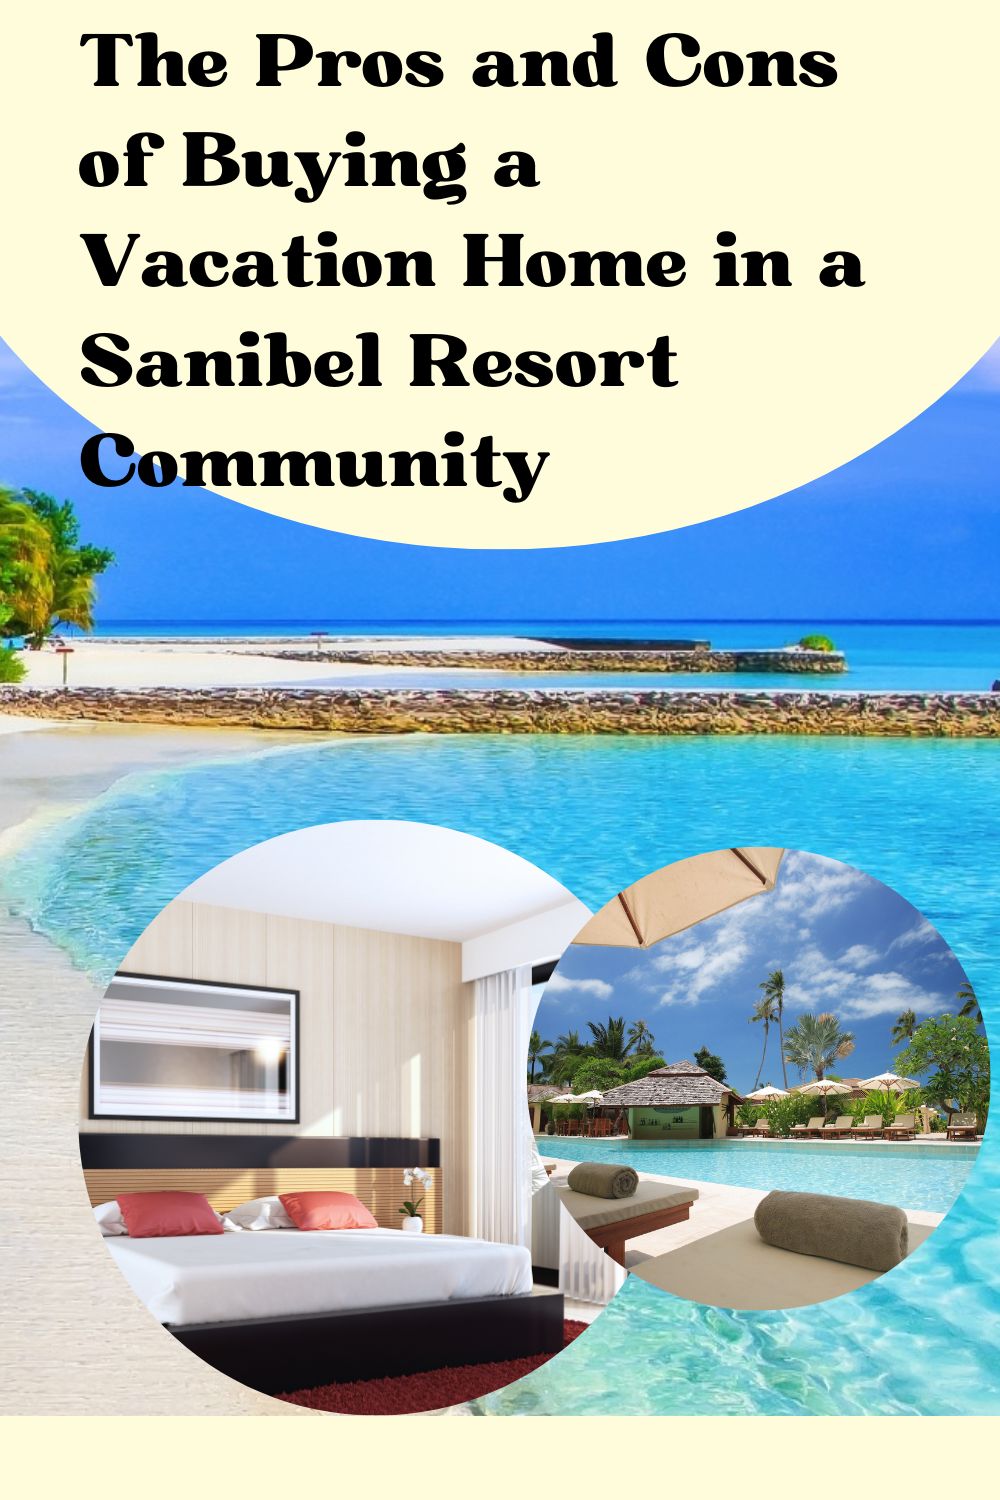 The Pros and Cons of Buying a Vacation Home in a Sanibel Resort Community